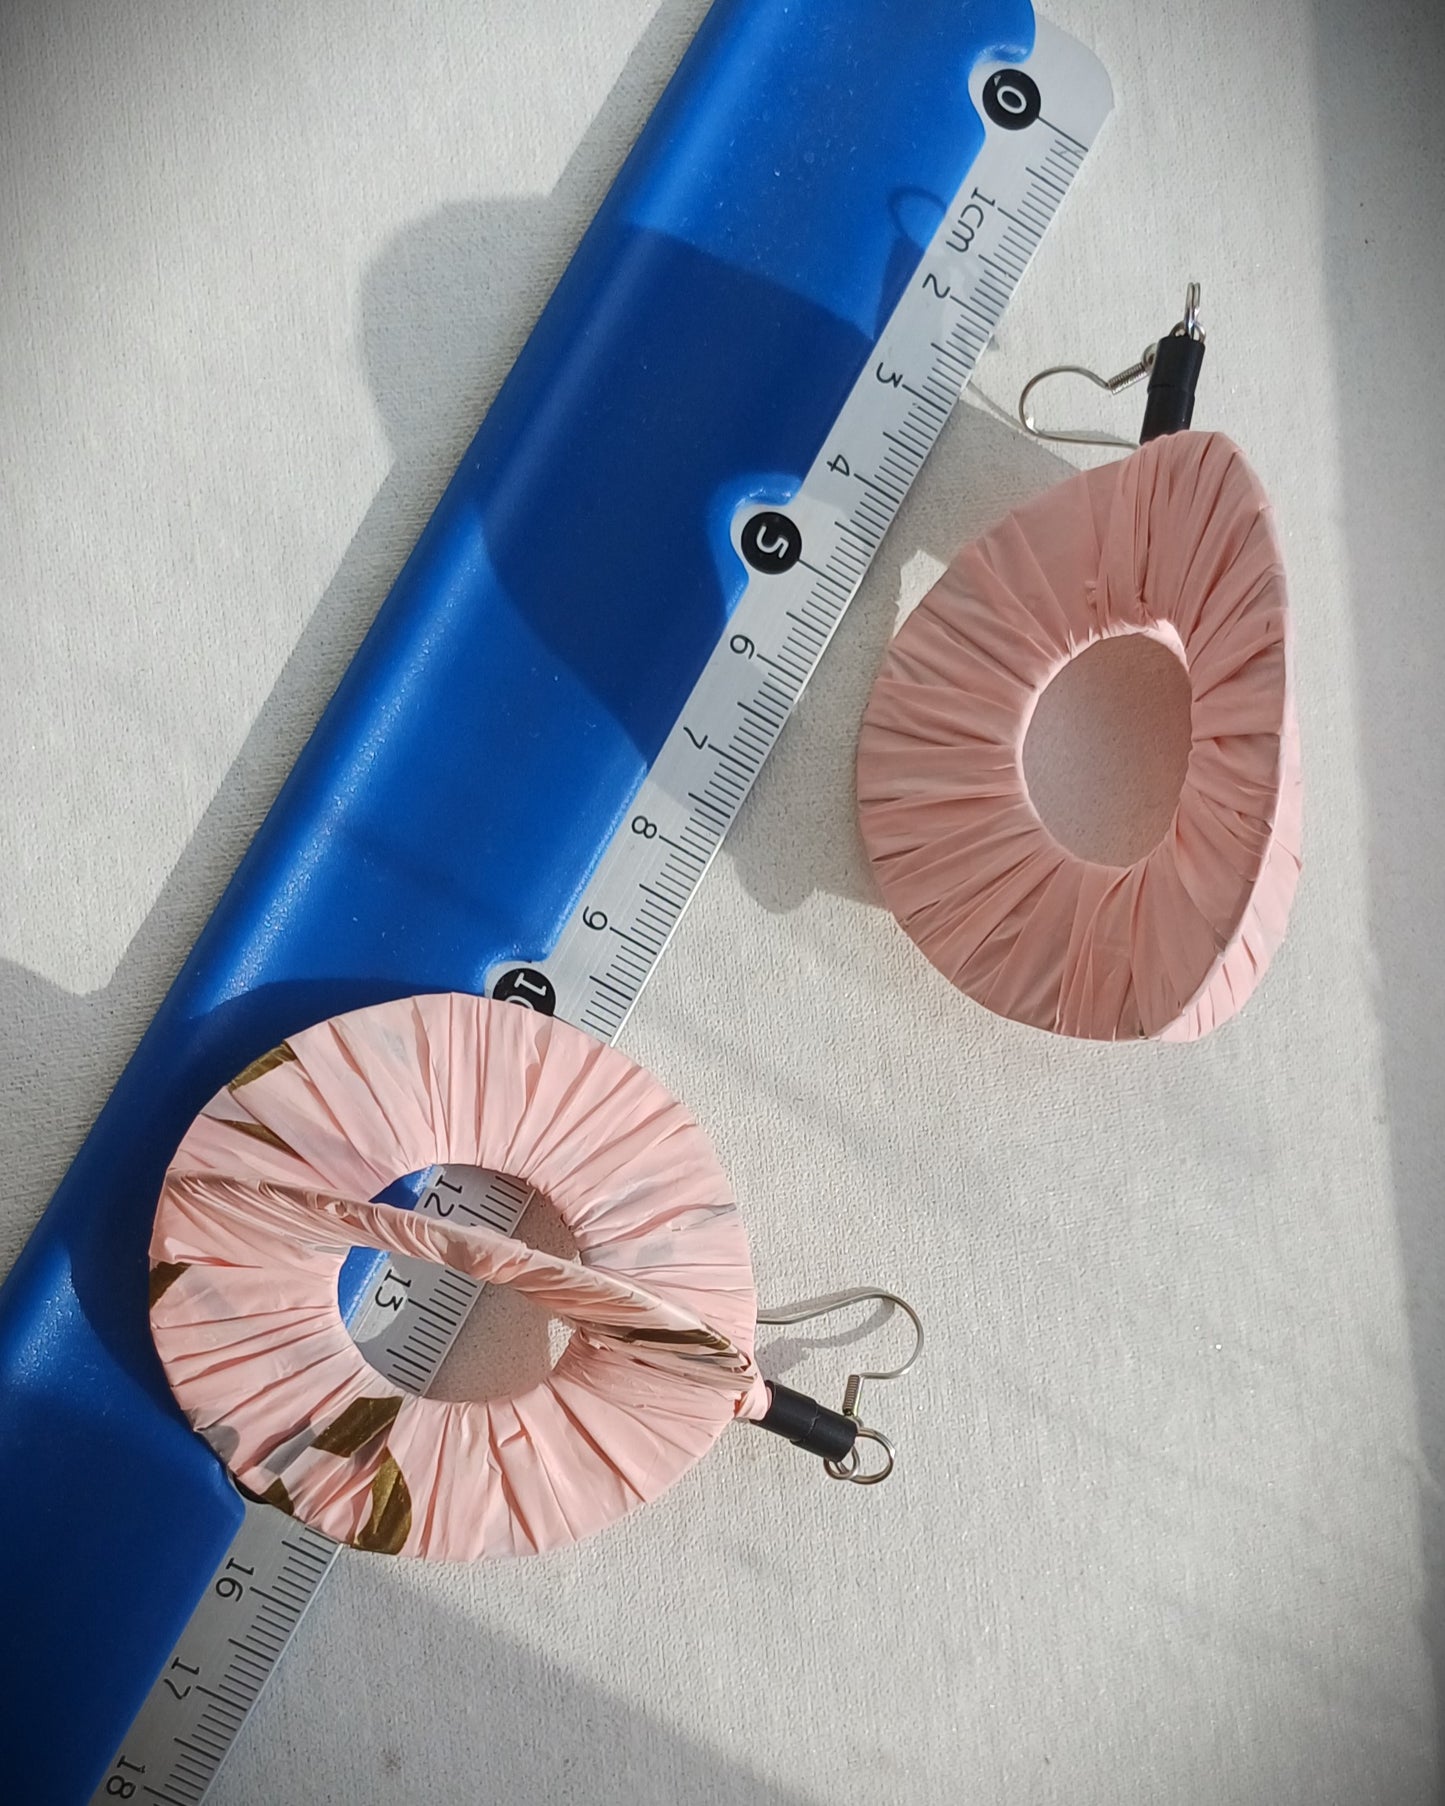 3D Pink Hoops PungaGlow Eco Earrings Upcycled Jewelry